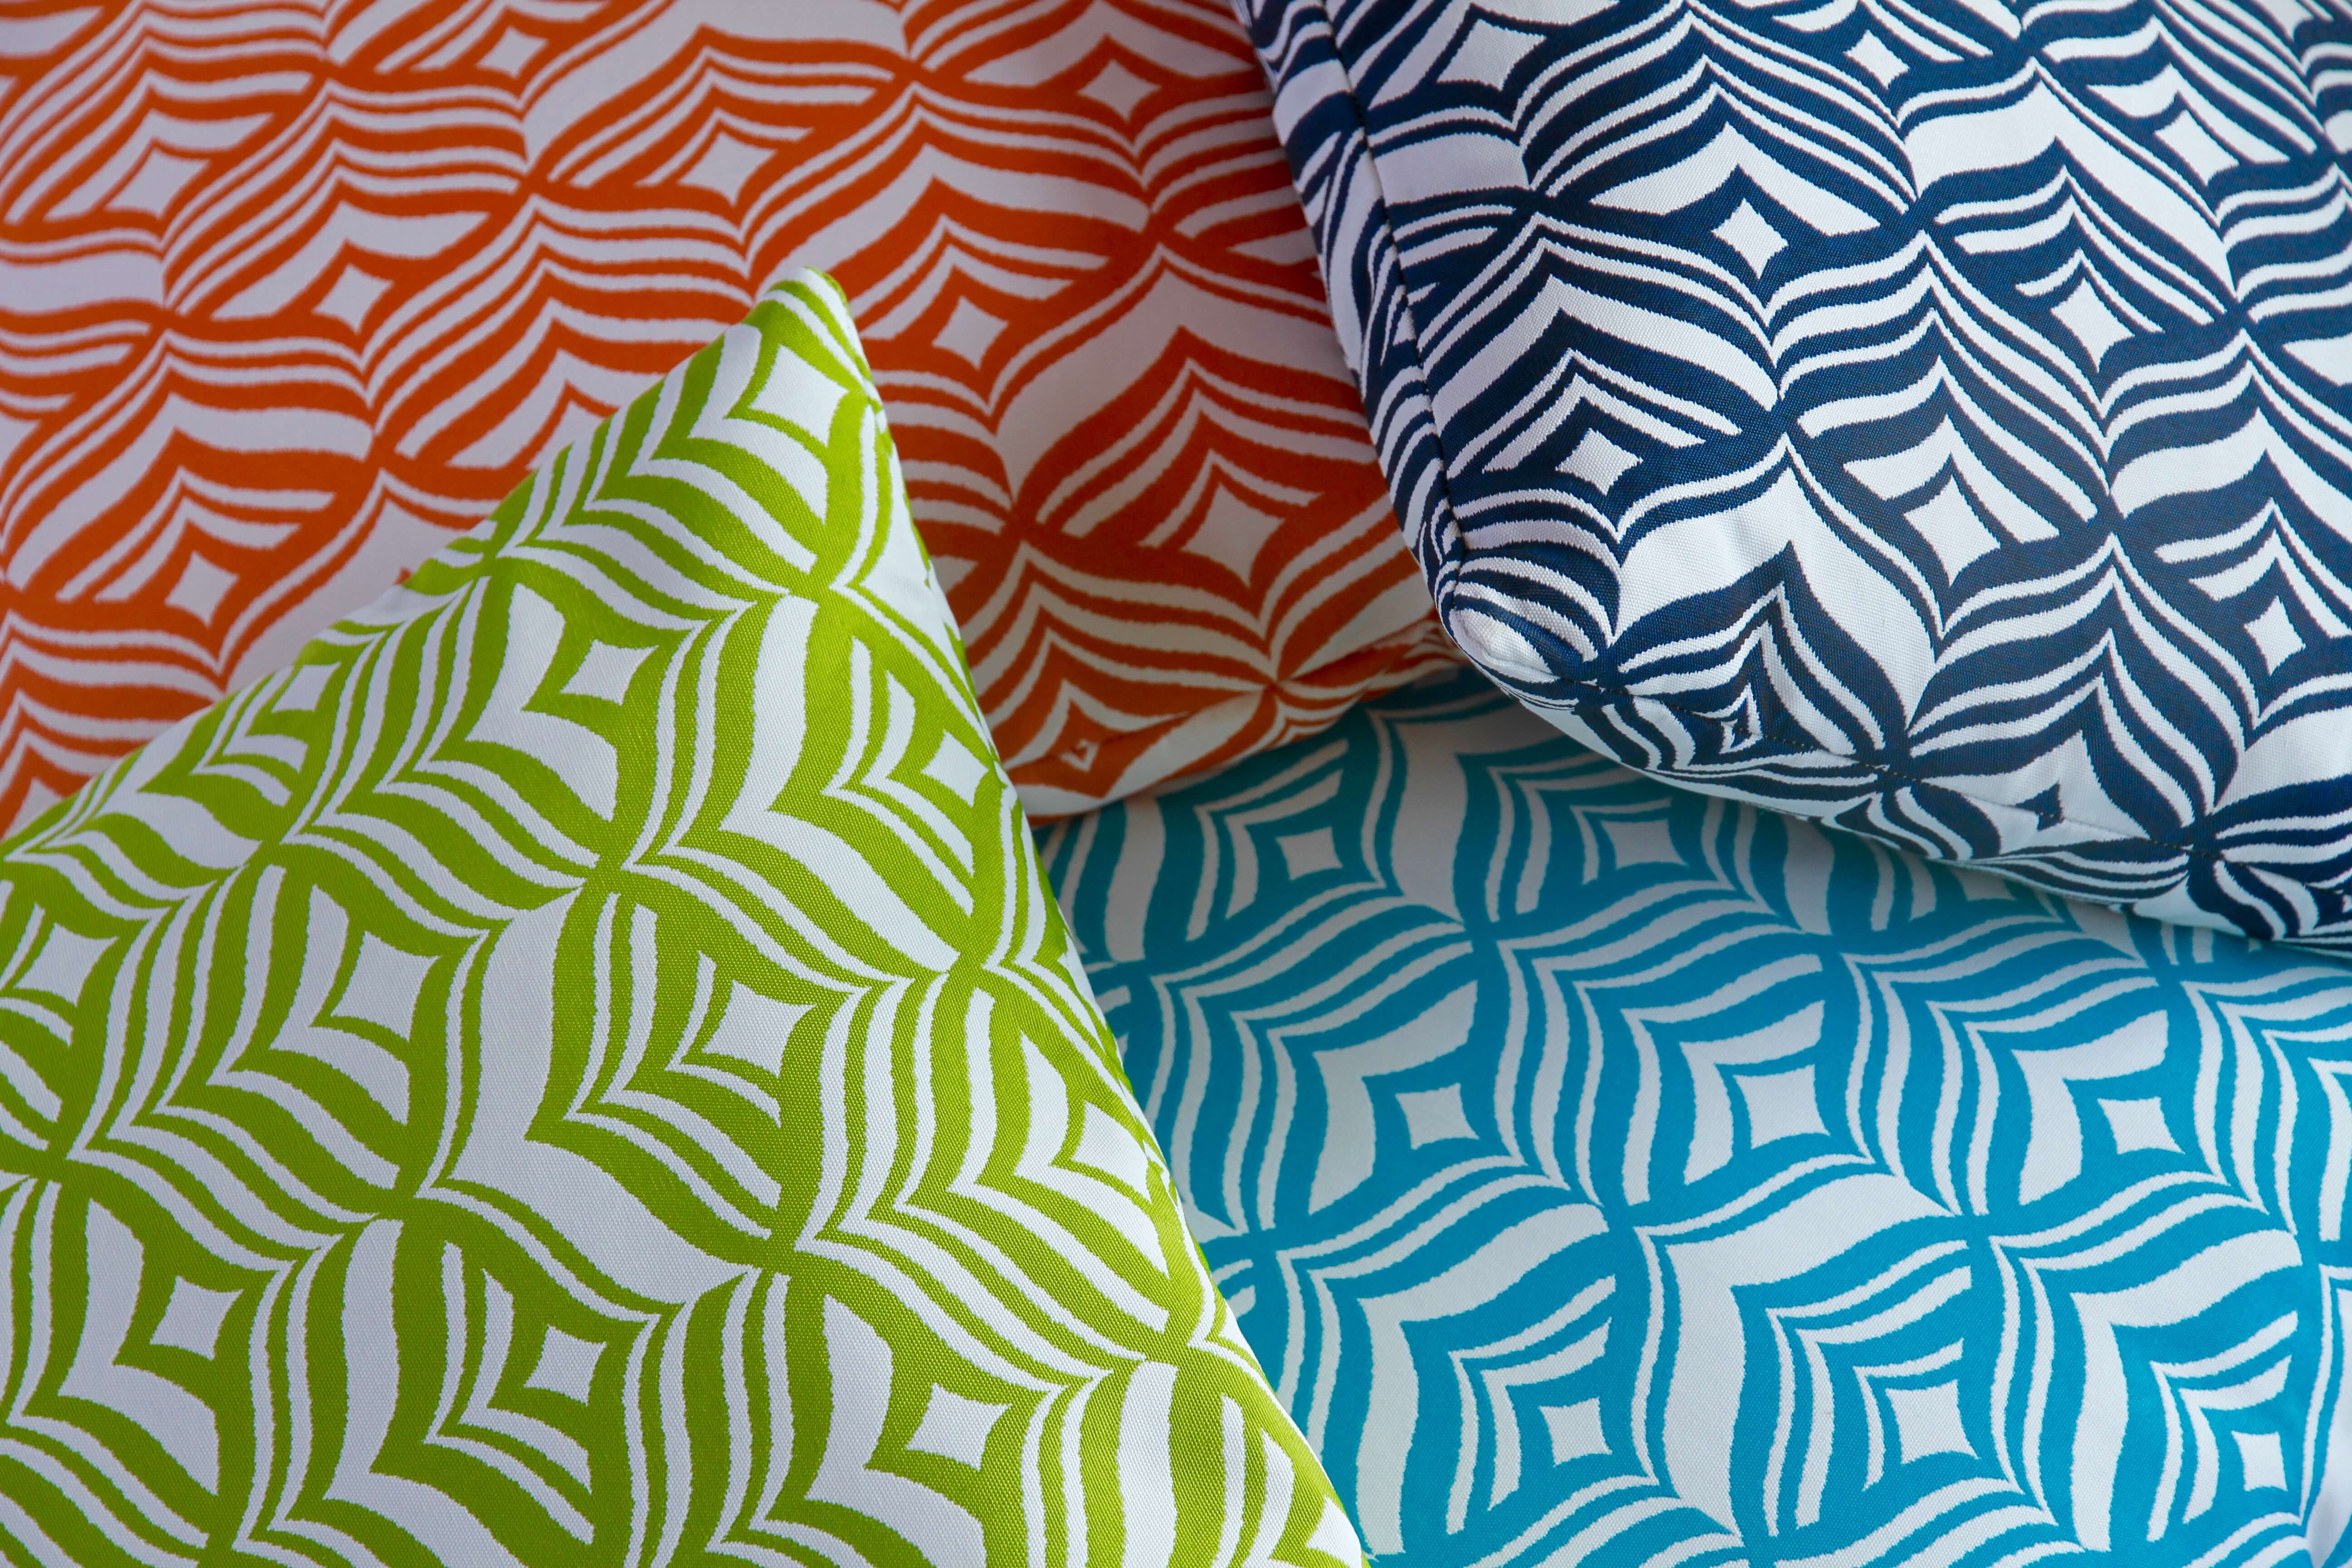 Four Outdoor Cushions in patterned fabric of orange, turquoise, lime green and navy blue